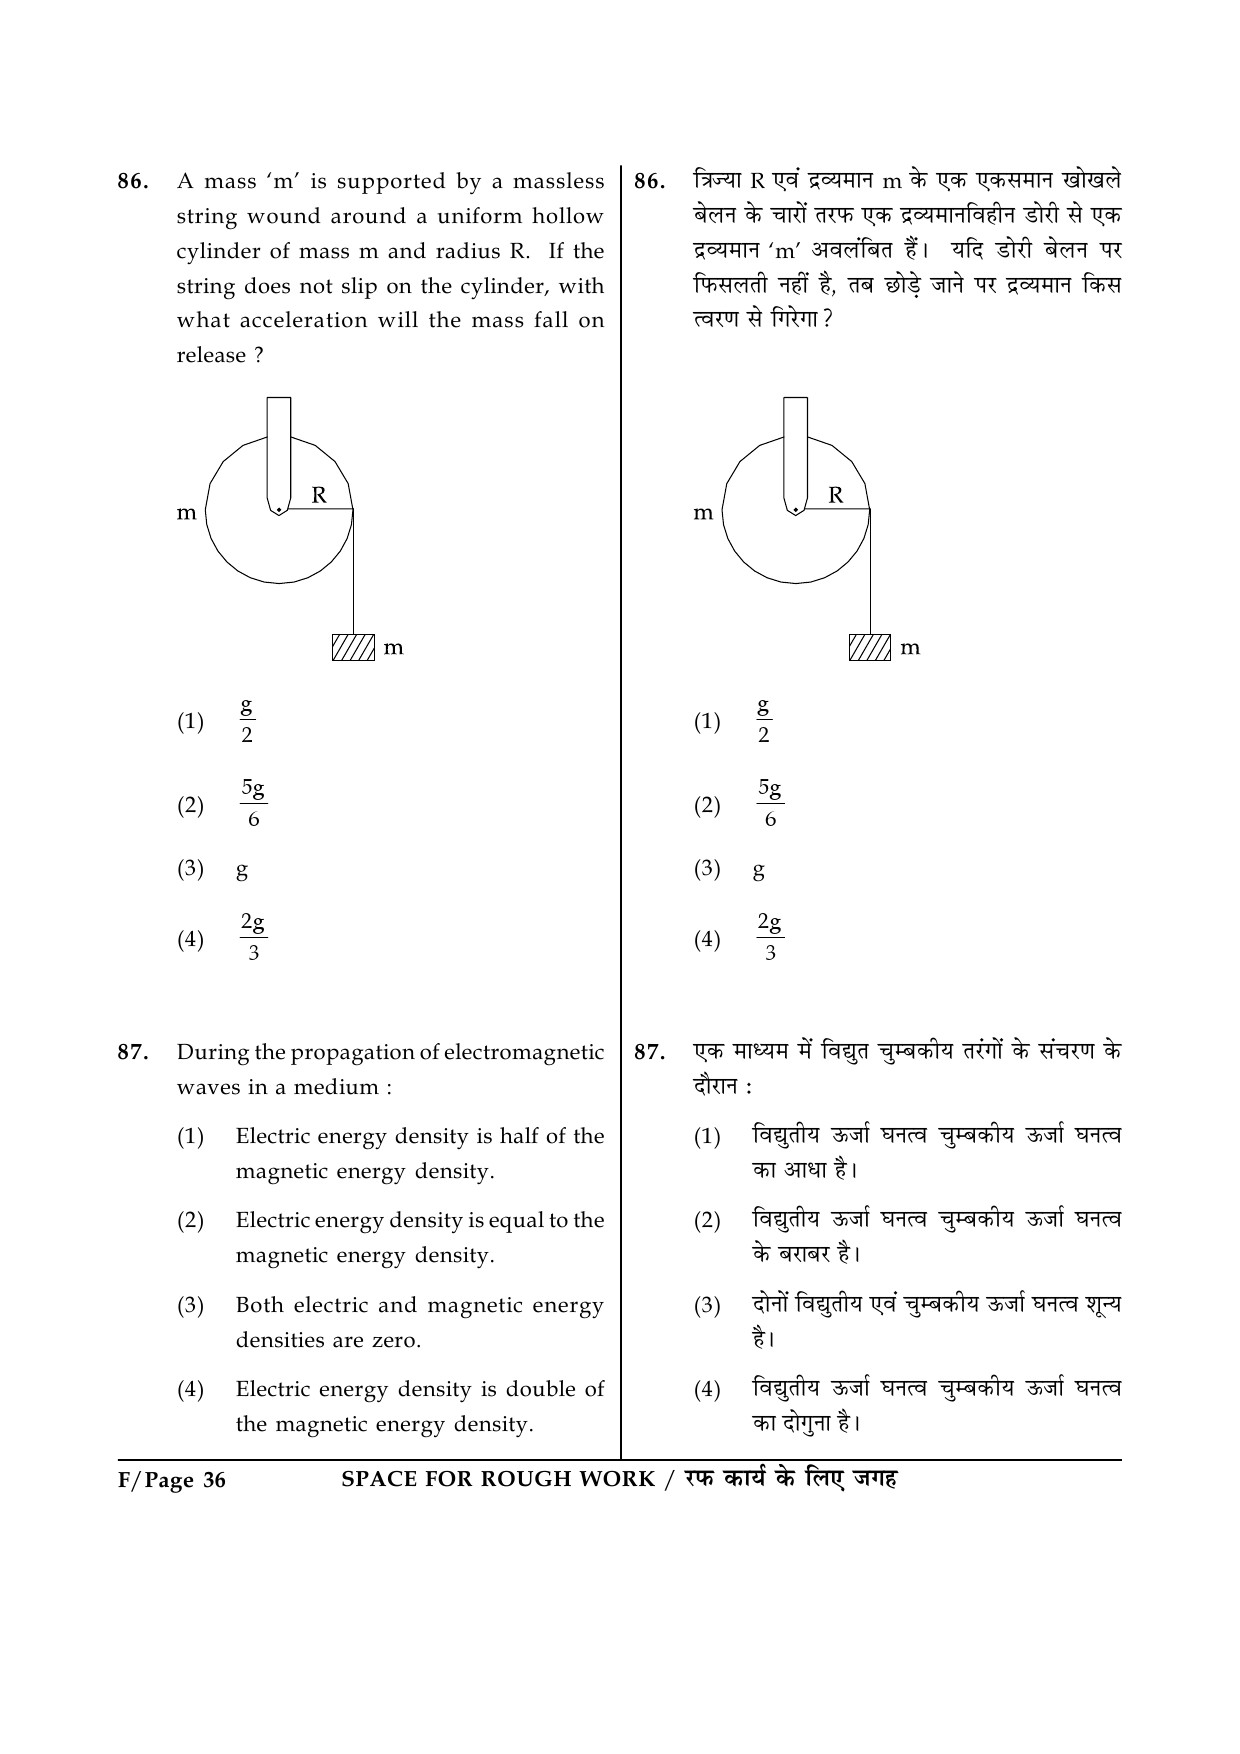 JEE Main Exam Question Paper 2014 Booklet F 36